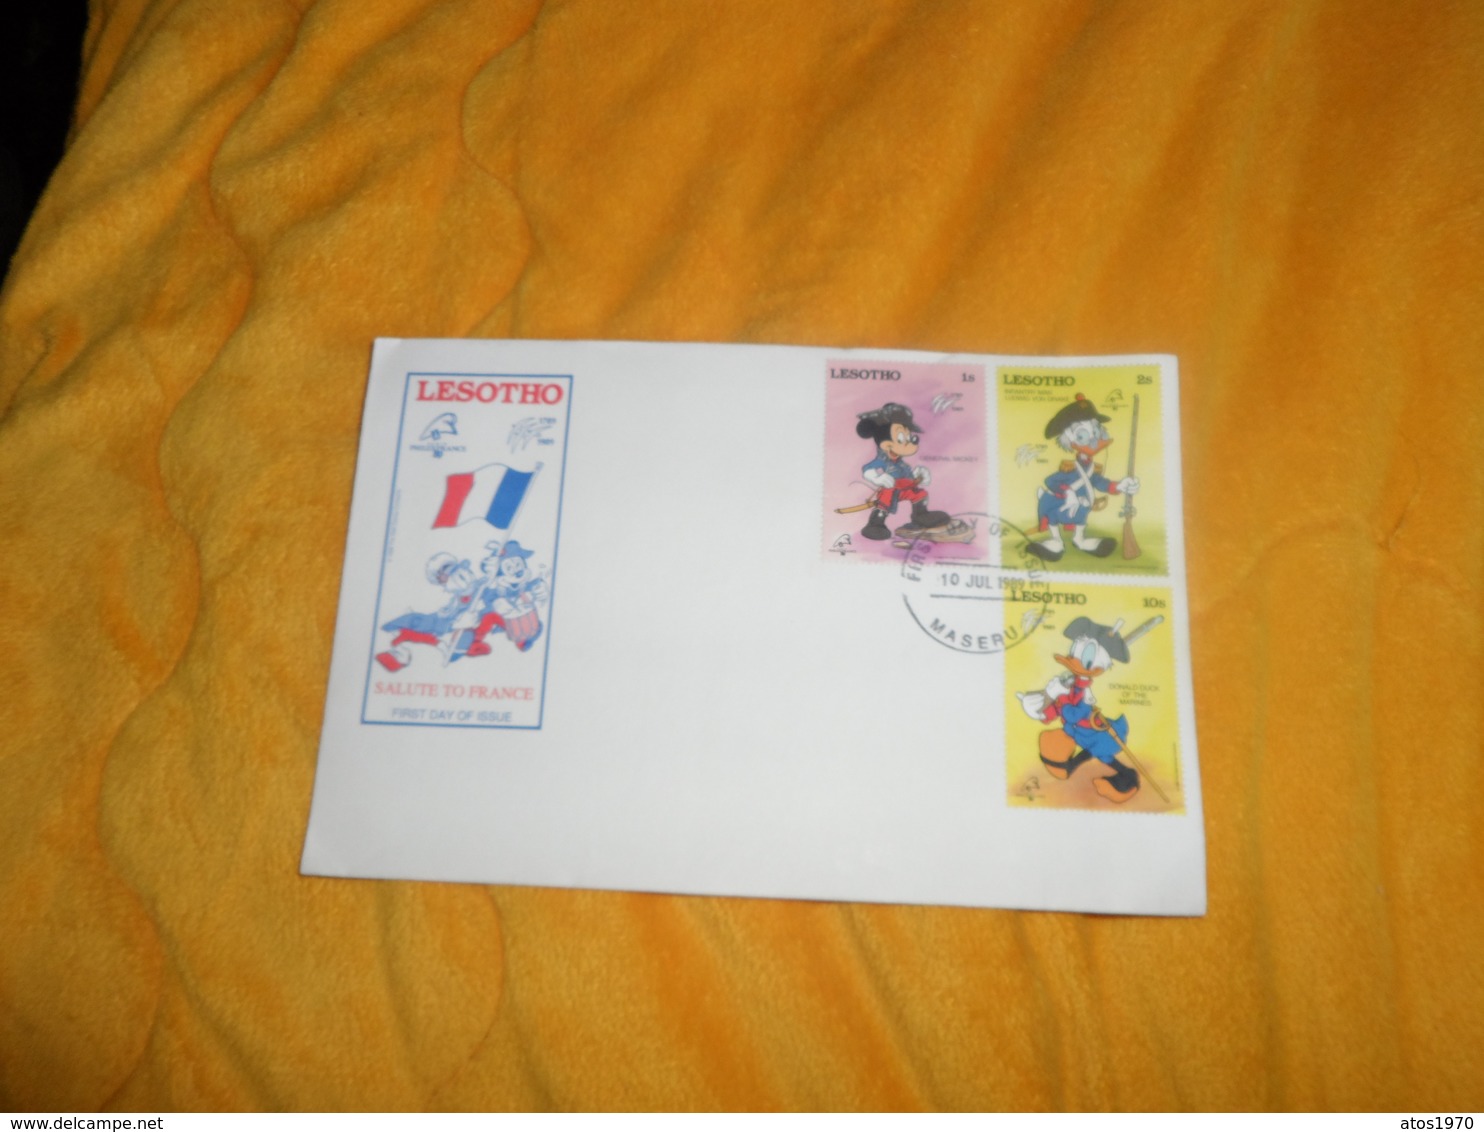 ENVELOPPE FDC DE 1989. / LESOTHO SALUTE TO FRANCE PHILEXFRANCE 89. / CACHET + TIMBRES MICKEY DONALD - Lesotho (1966-...)